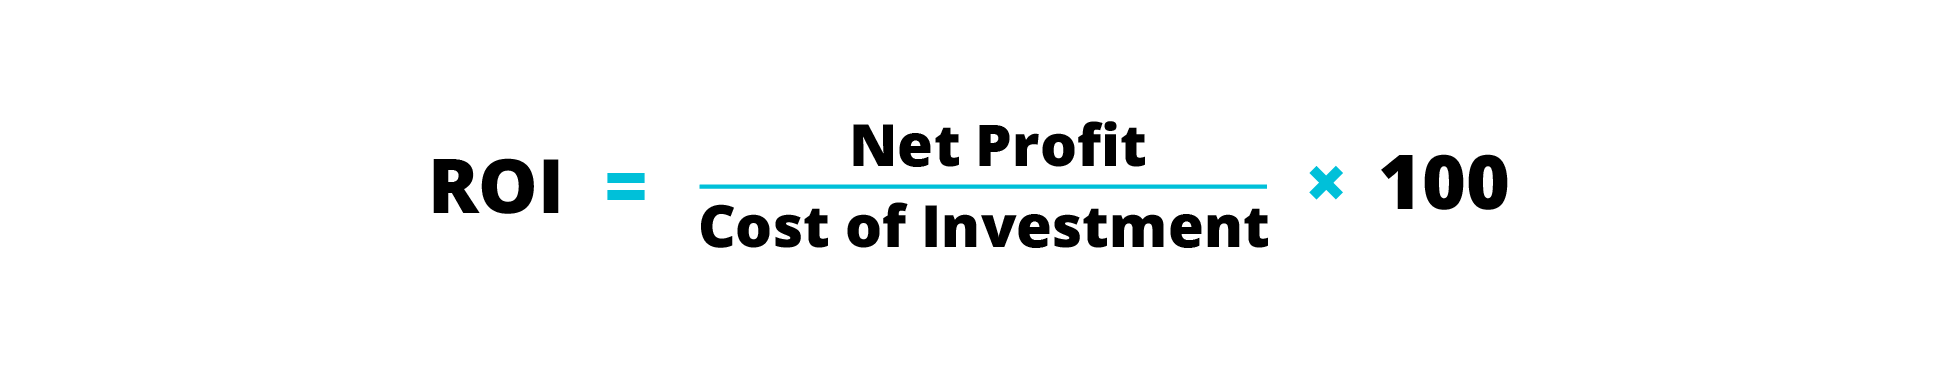 ROI = (Net Profit / Cost of Investment) x 100